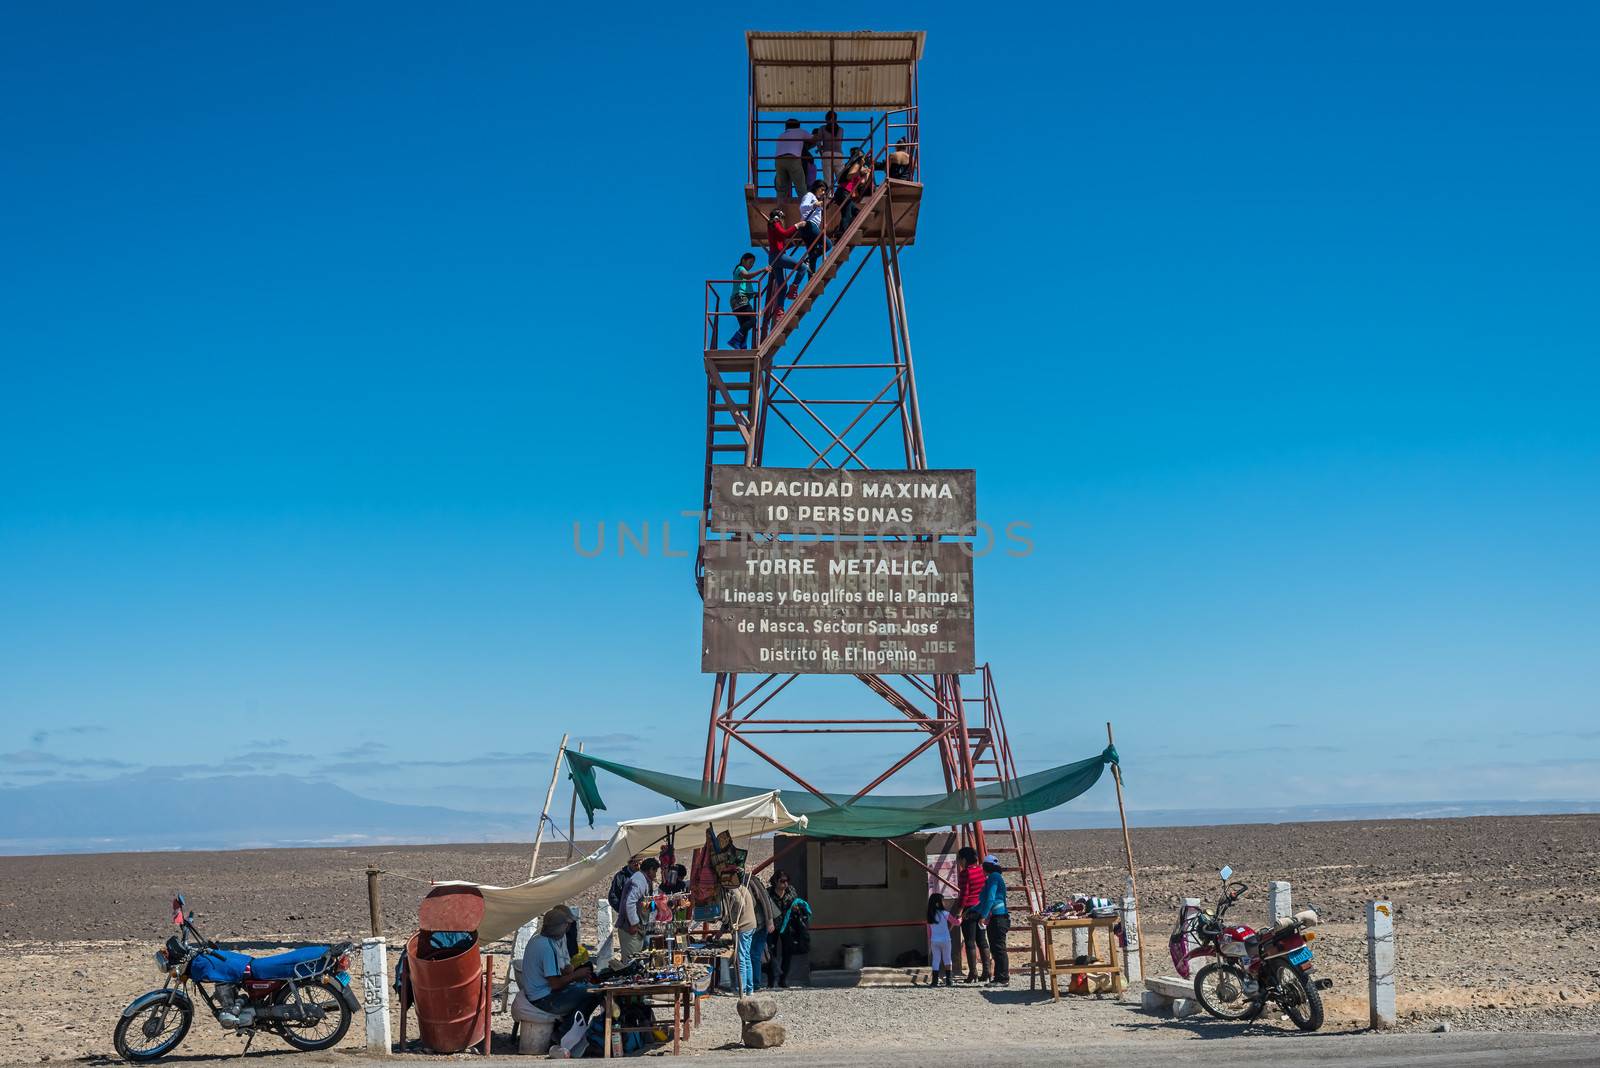 Nazca, Peru - July 31, 2013: people at the nazca lines observation tower in the peruvian coast at Ica Peru on july 31, 2013